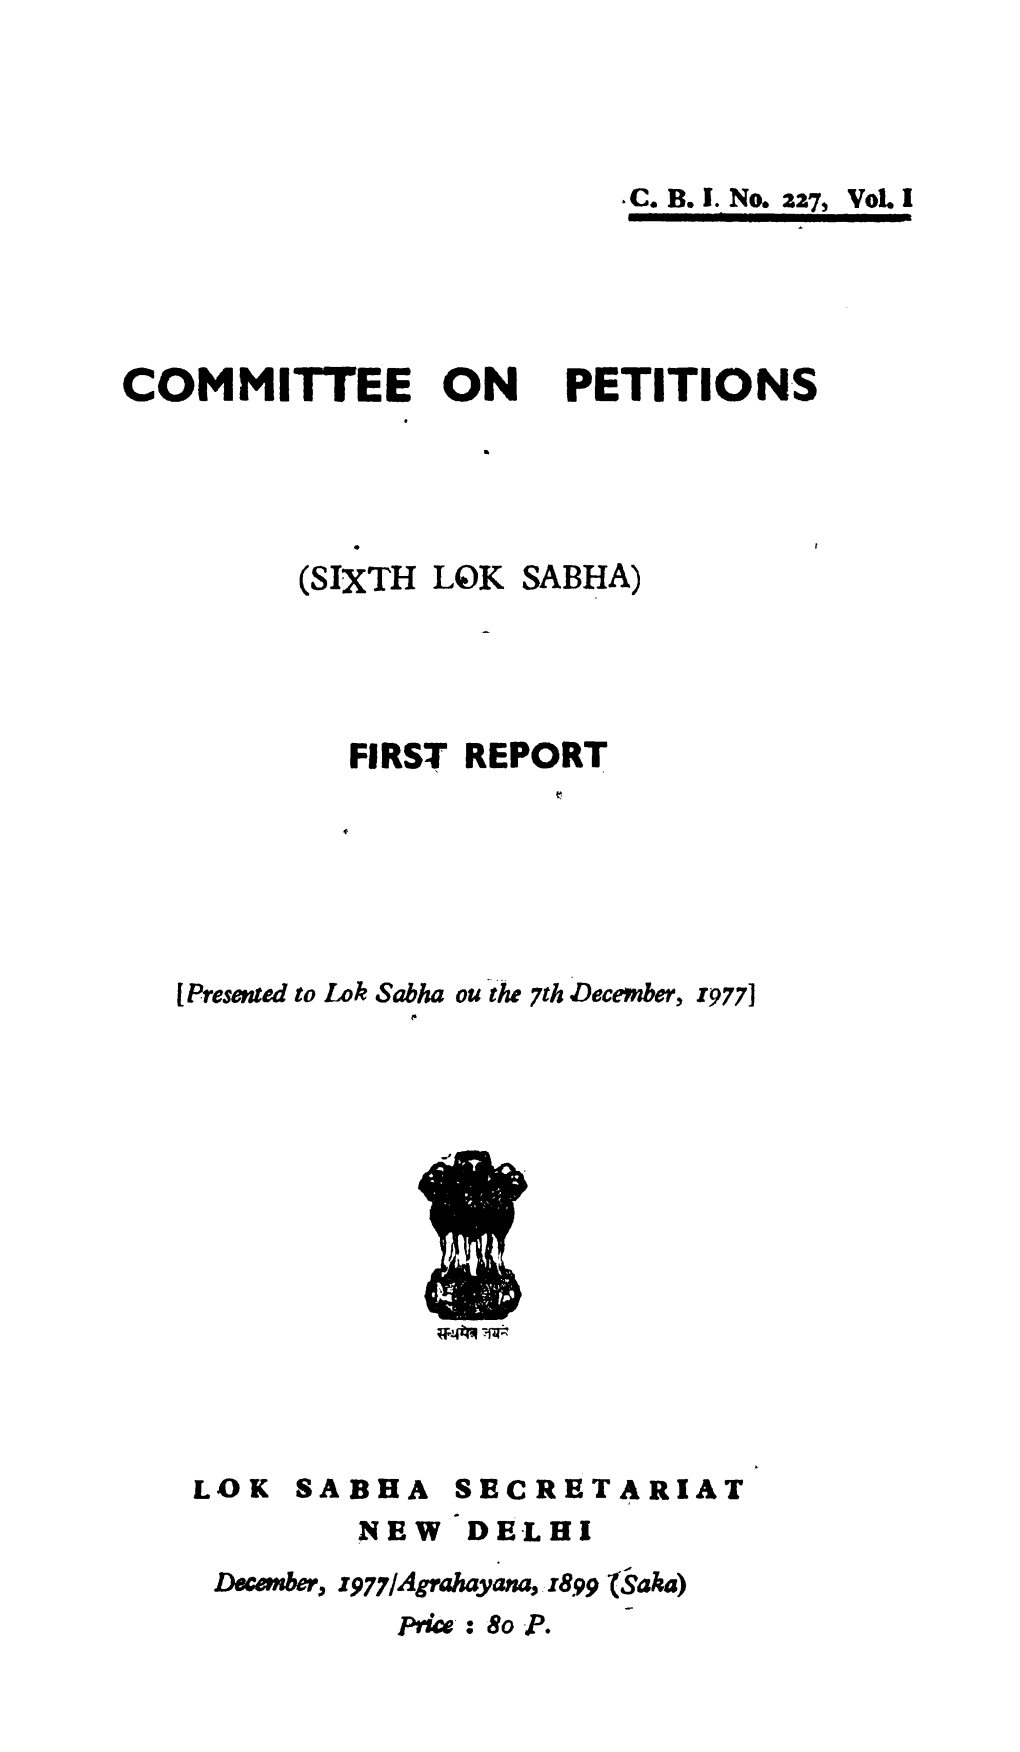 Committee on Petitions -'